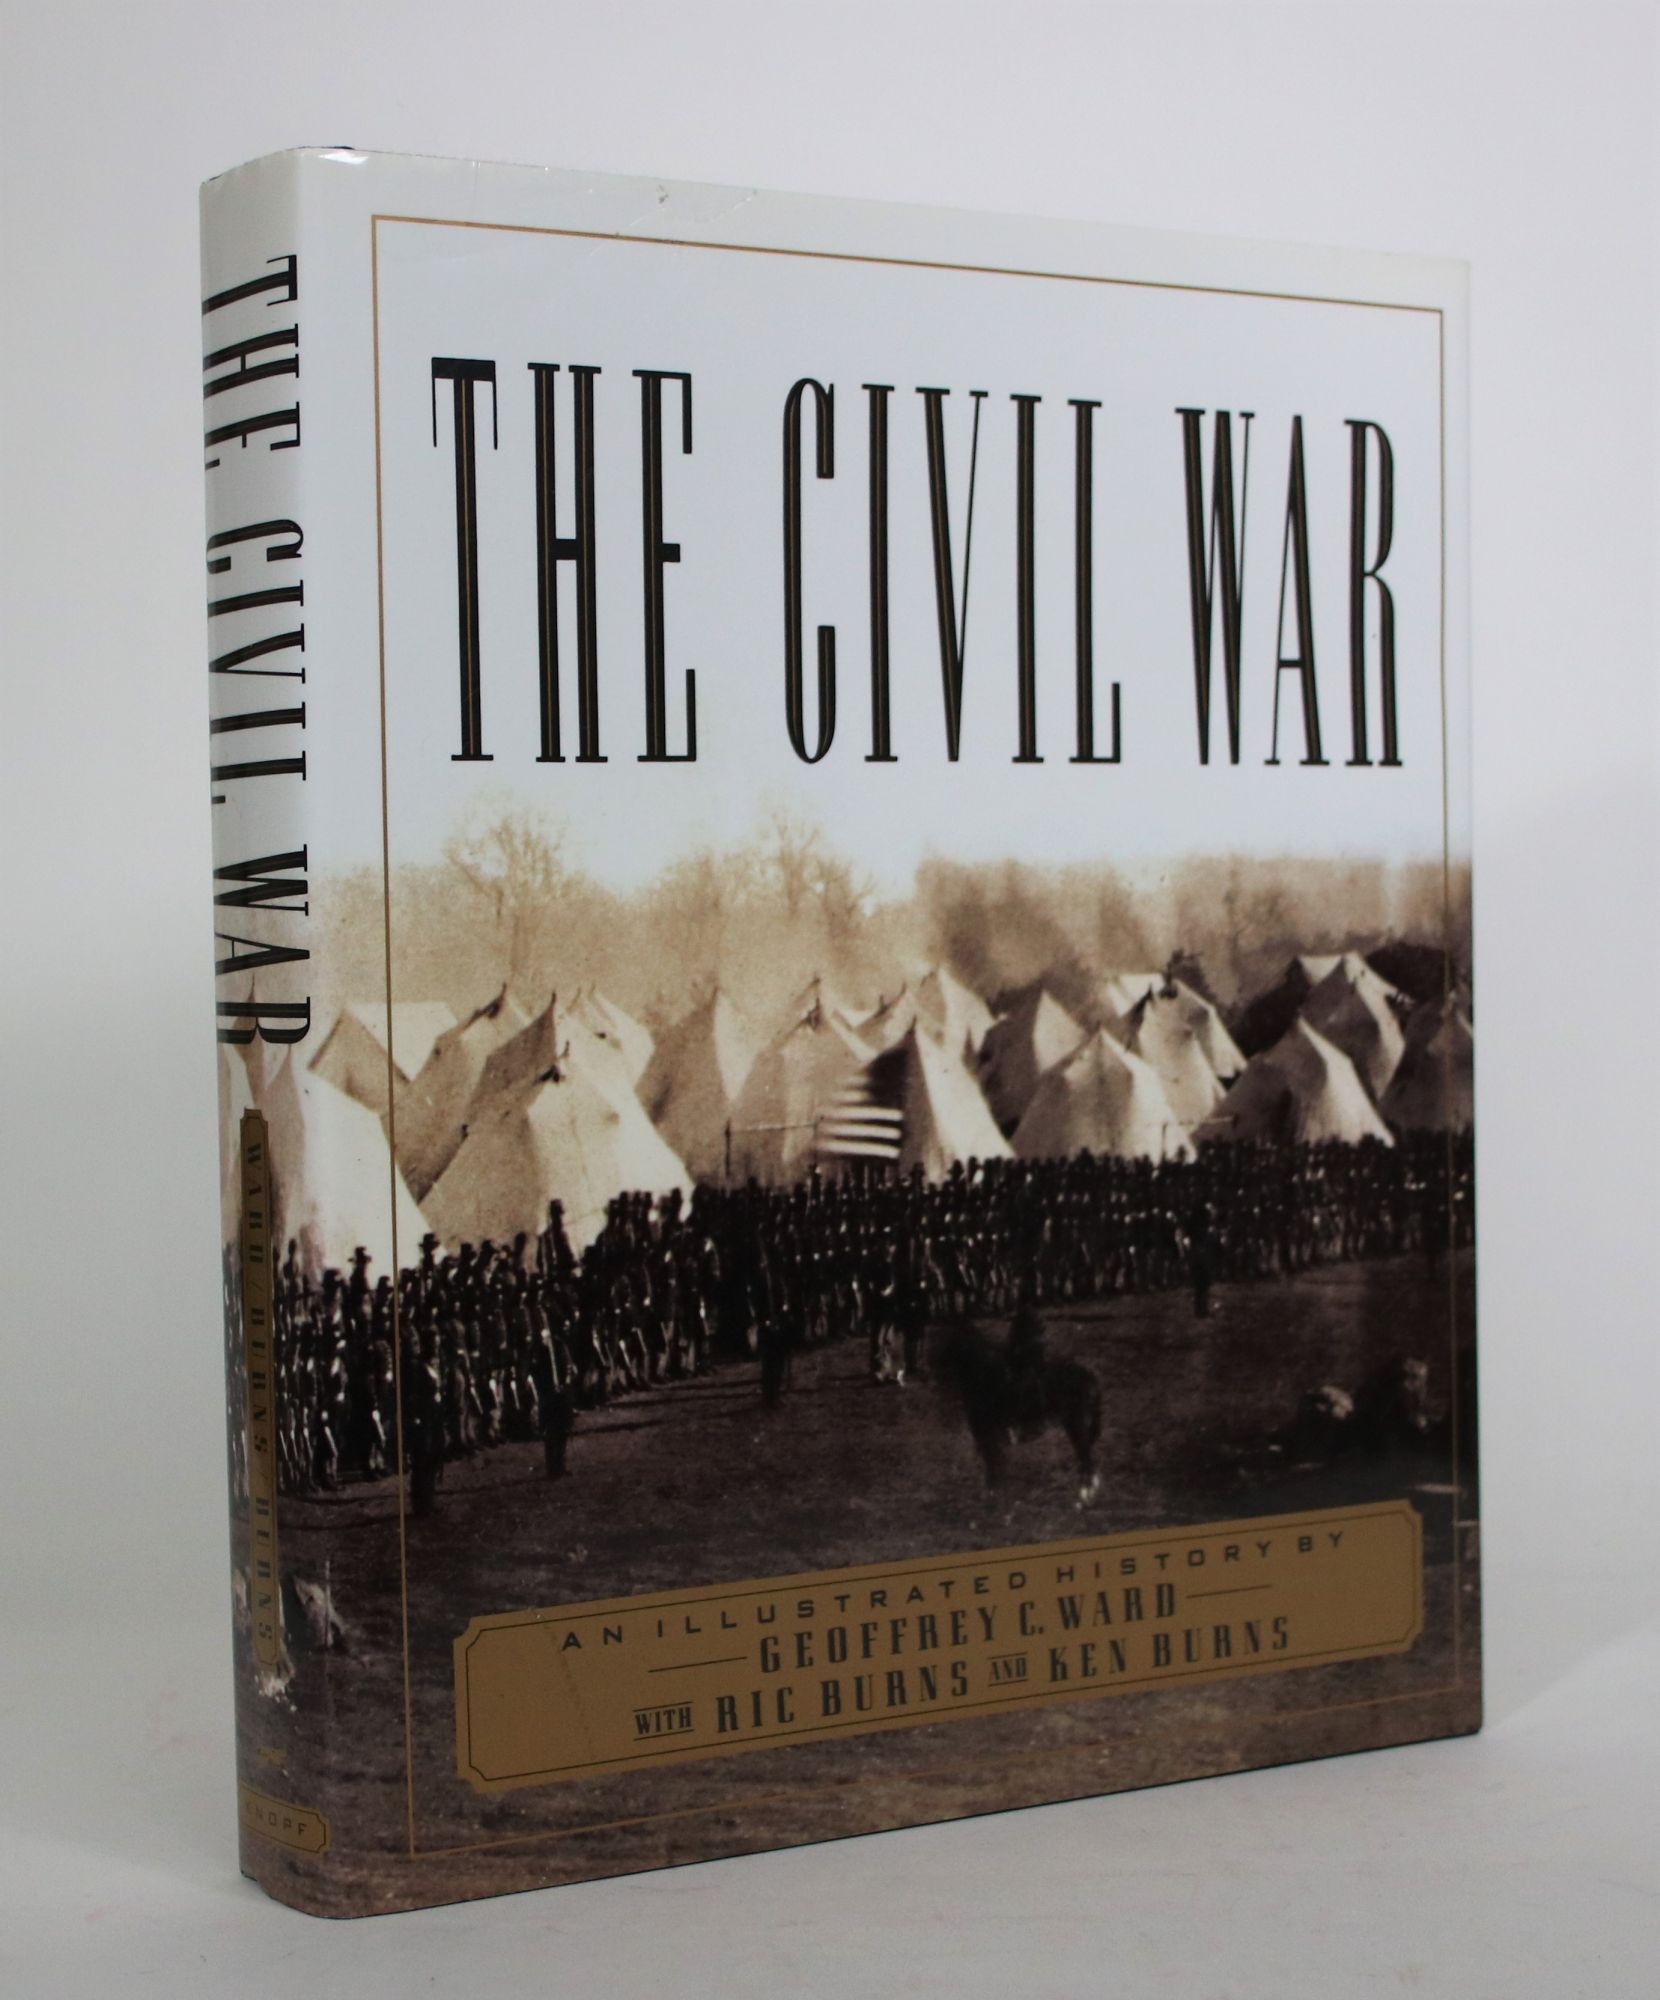 Geoffrey　ILAB　The　Burns　and　Ric　History　Author(s)　(1990)　Minotavros　Civil　Fine　Illustrated　Hardcover　War:　ABAC　with　C.,　An　Ken　by　Books,　Ward,　Burns:　Signed　by